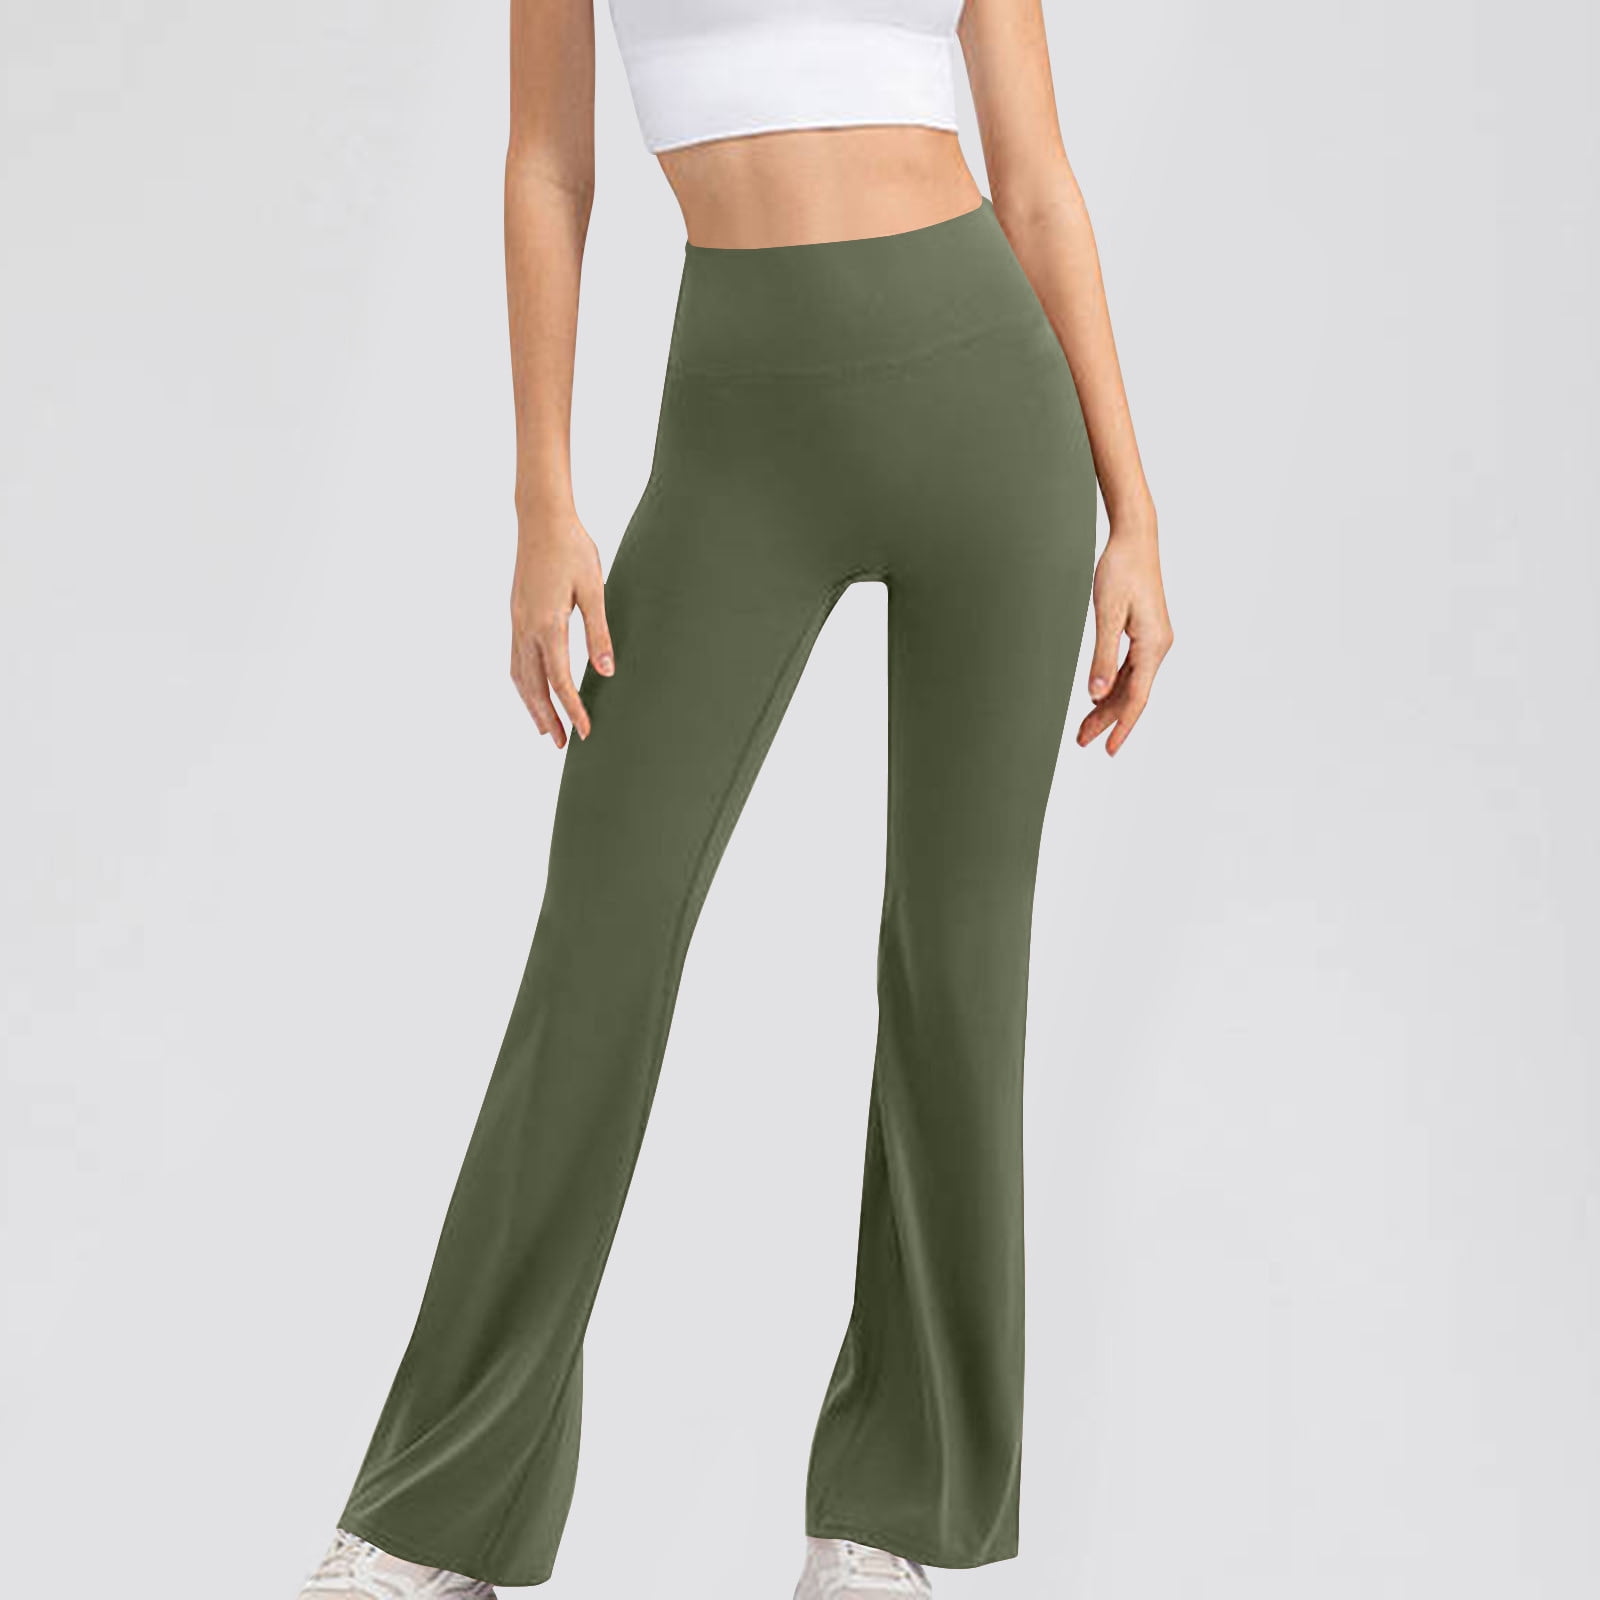 Herrnalise 28/30/32/34 Inseam Women's Bootcut Yoga Pants Long Bootleg  High-Waisted Flare Pants with Pockets Olive Green-M